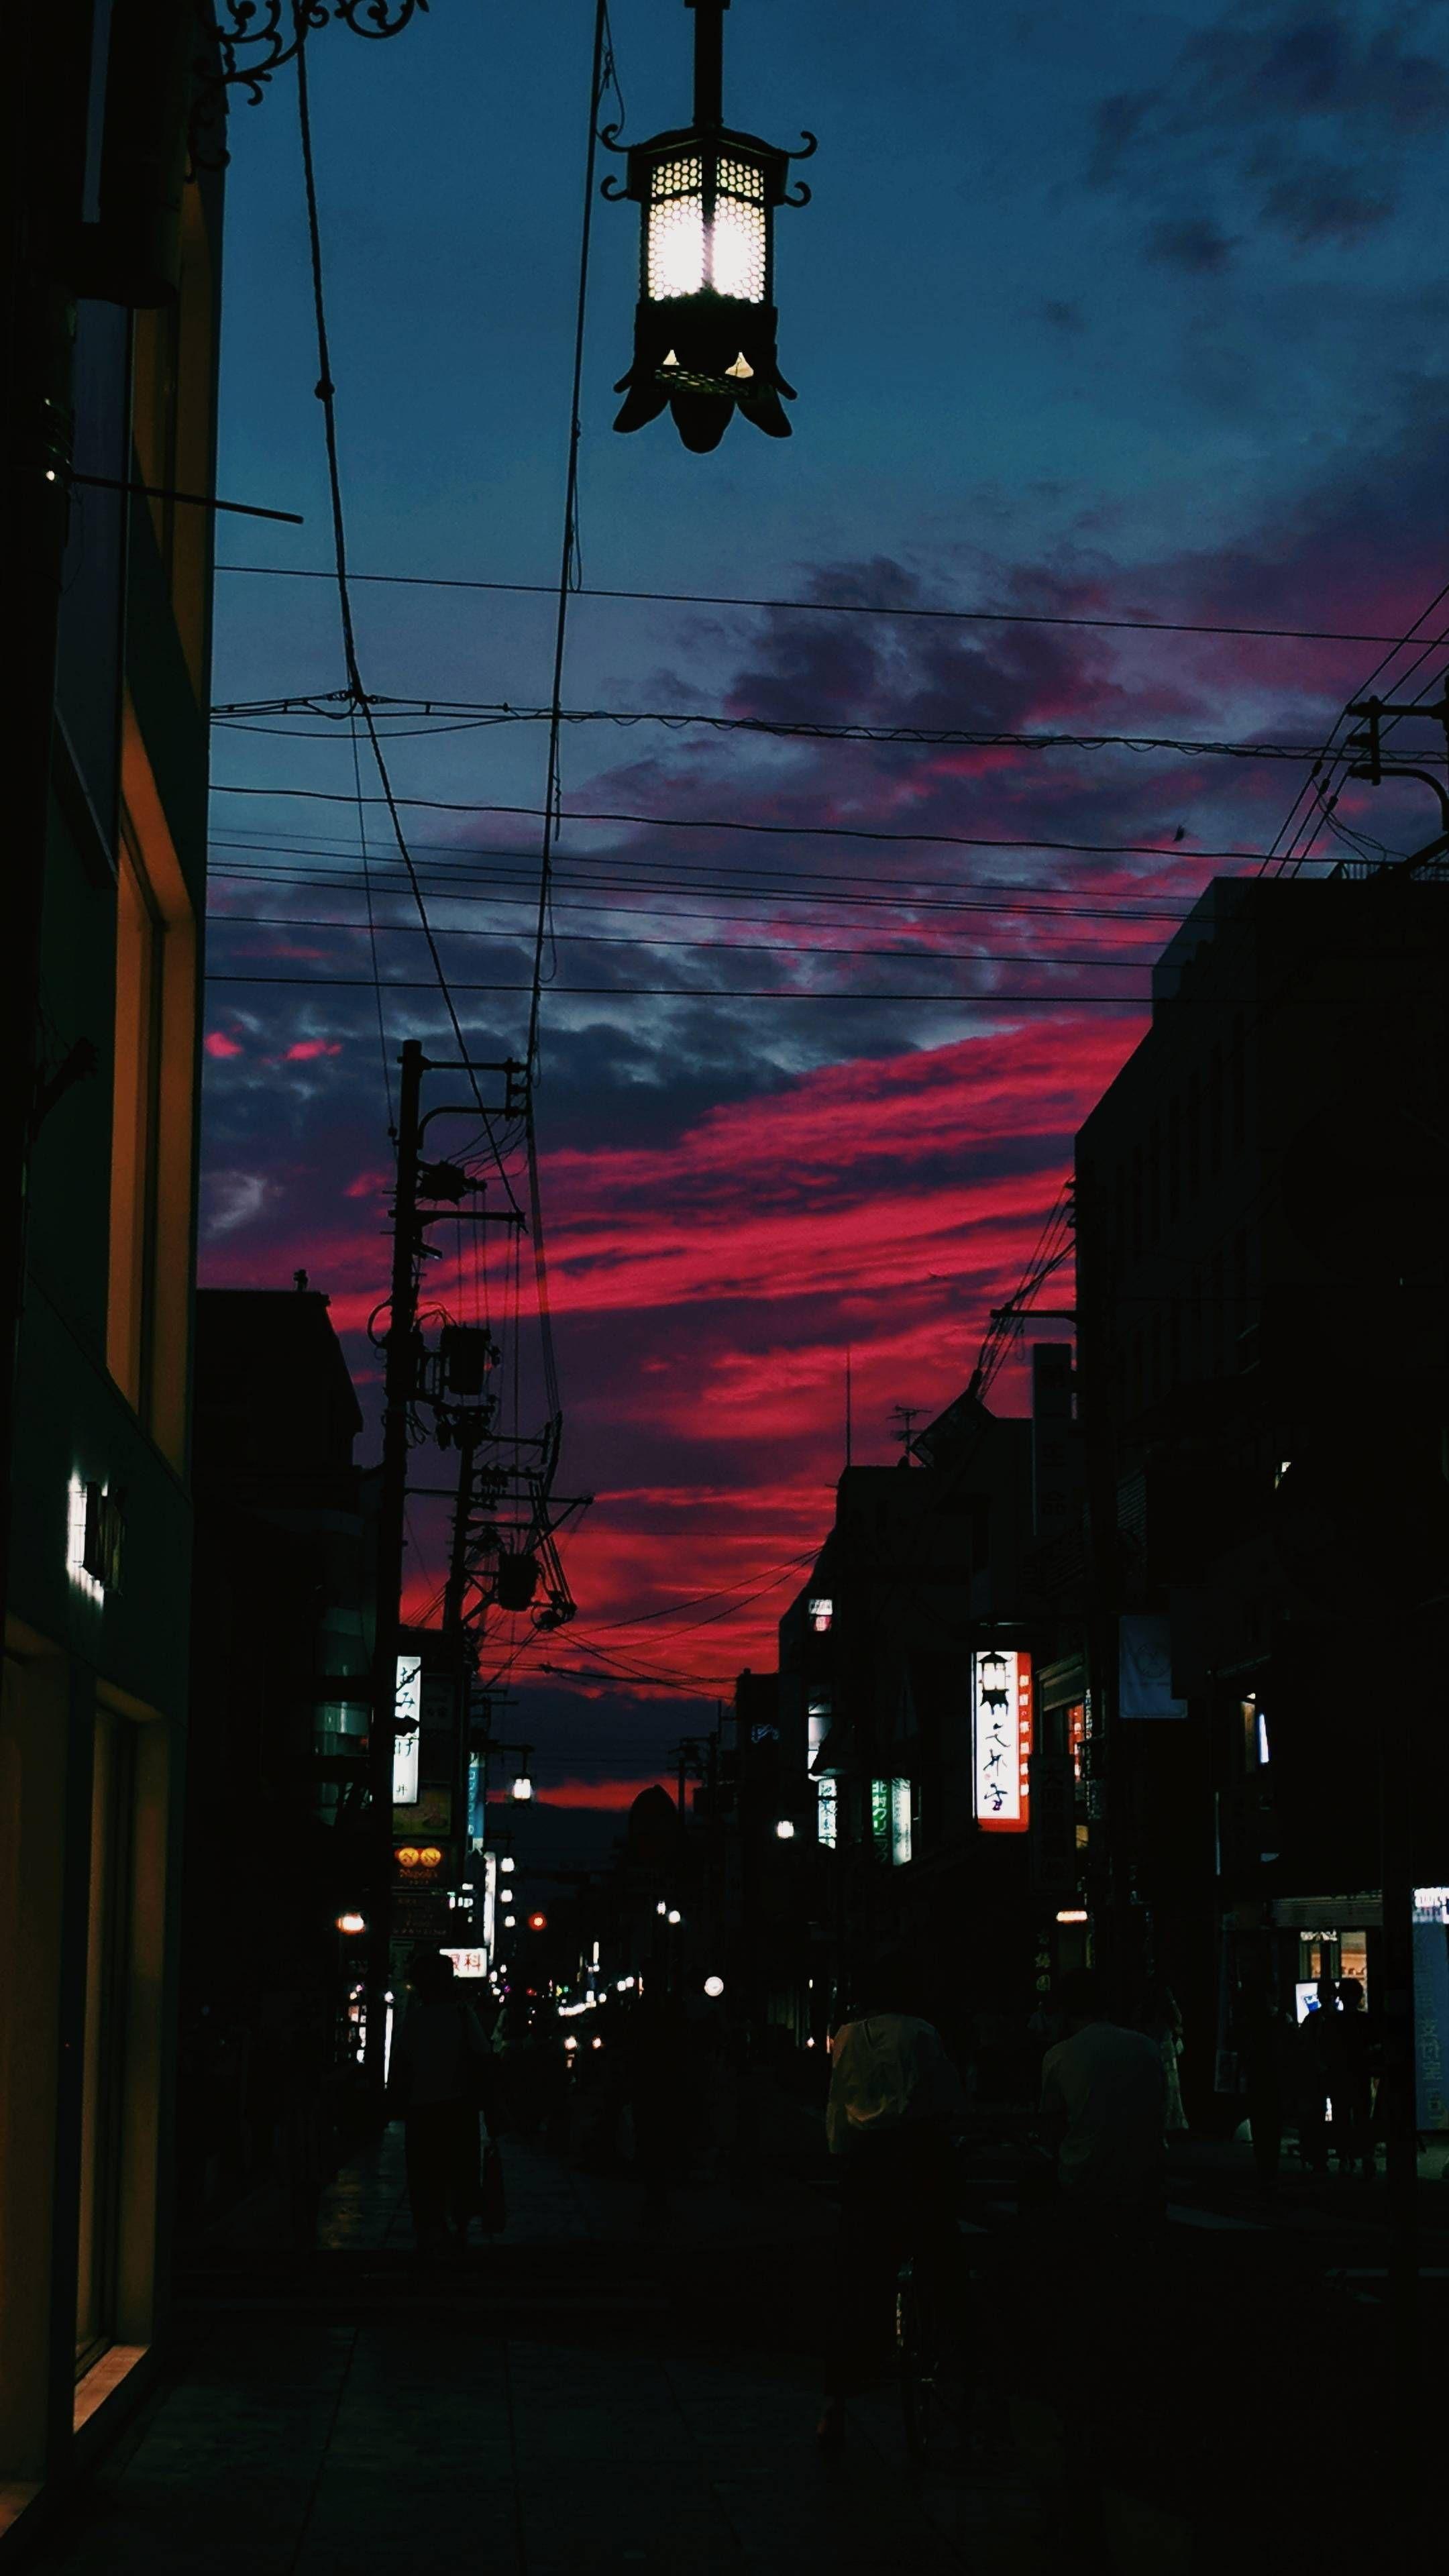 A beautiful sunset over a city street with tall buildings. - Phone, Japanese, Japan